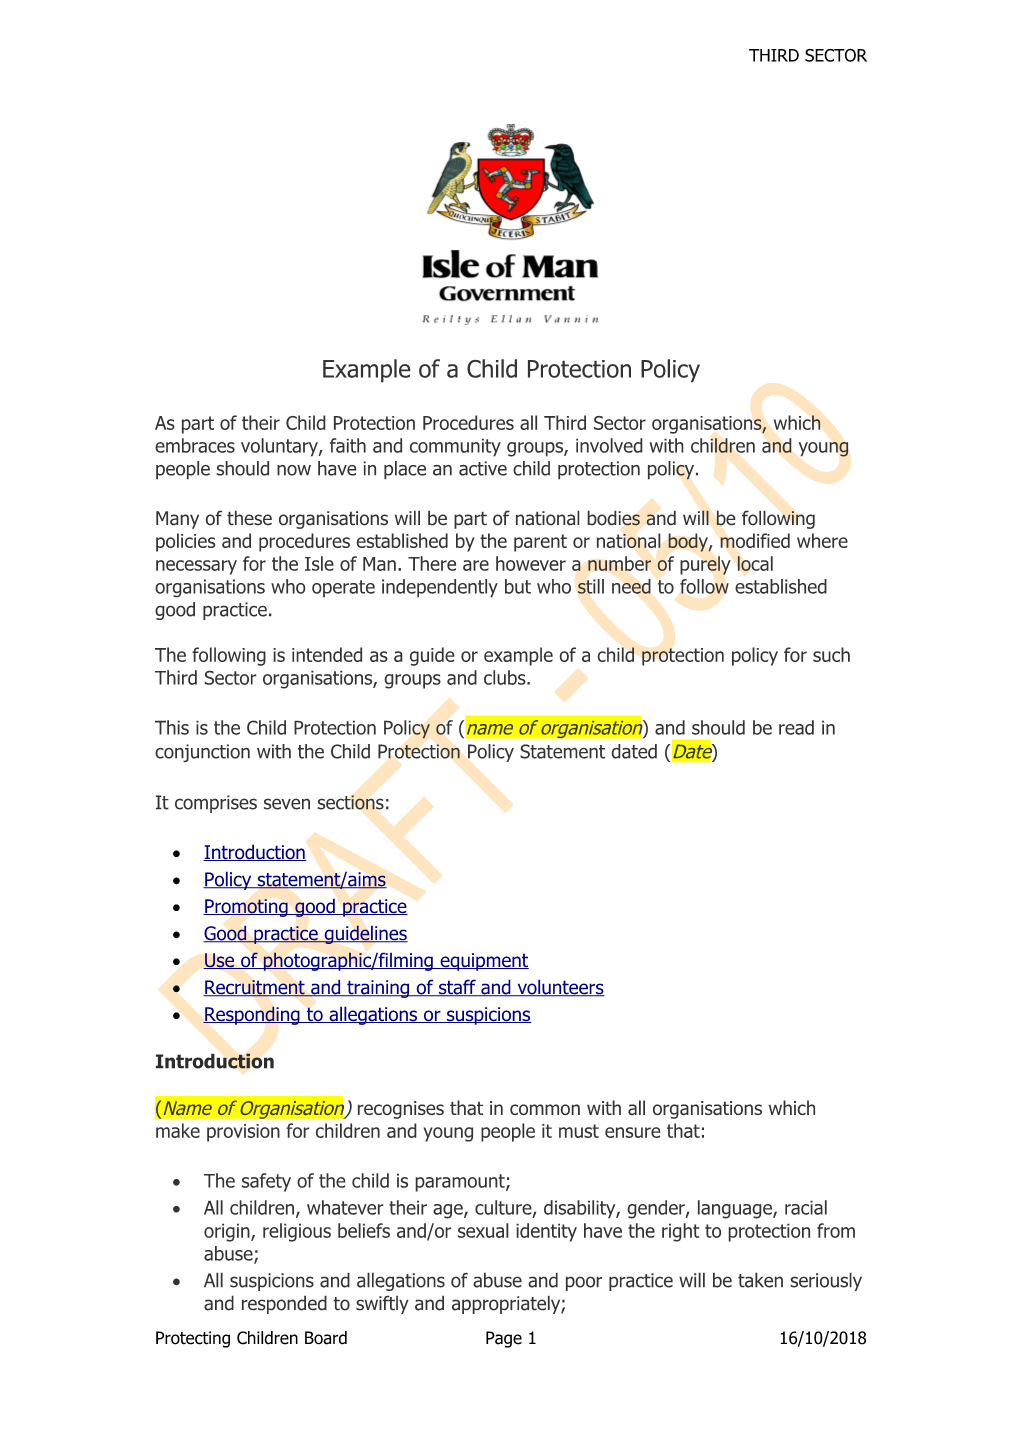 Example of a Child Protection Policy